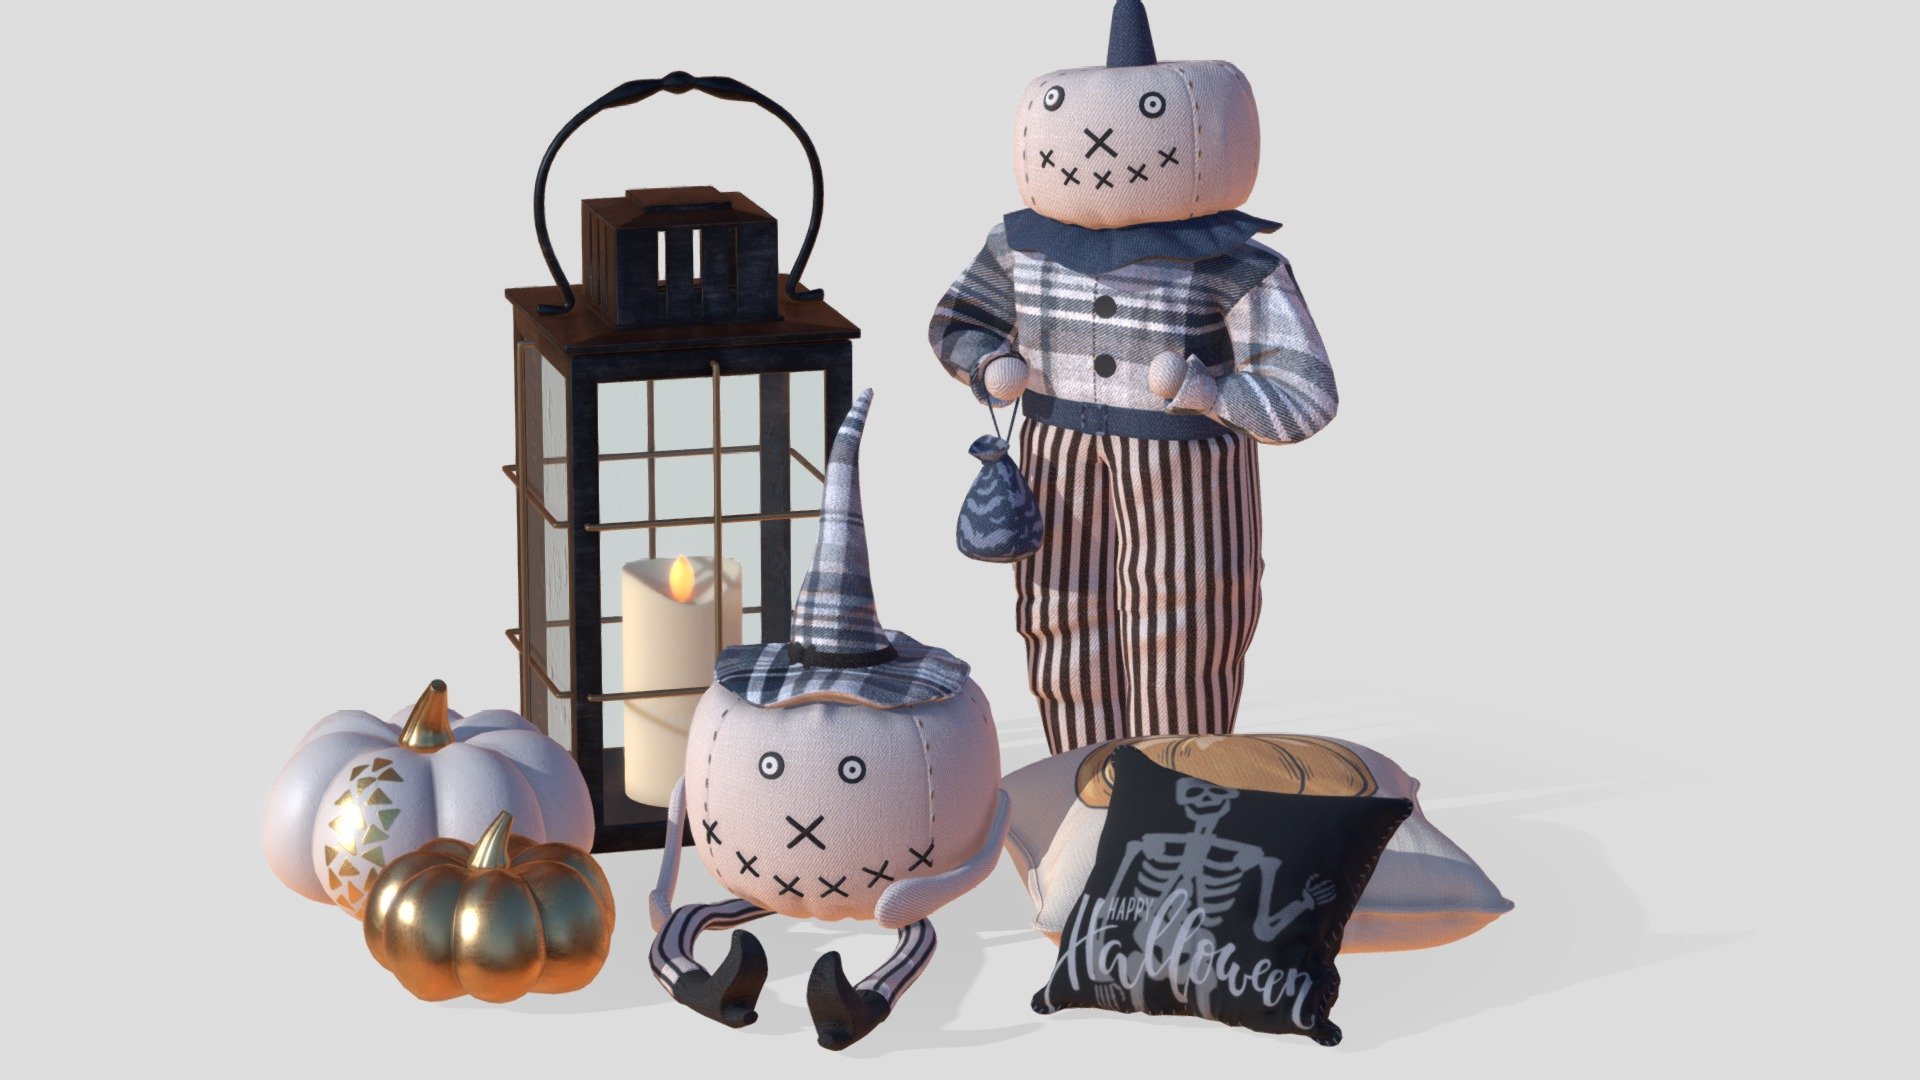 The Halloween decorative set consists of all the elements that can be seen in the render: a lantern with LED candles, two pillows, 2 pumpkins, 2 toys
For interior visualization
Materials Vray

In the archive:
file 3dsMax2018_vray, 3dsMax2016_vray, fbx, obj
PBR 2k textures - Albedo, Normal, Roughness, Metallic - Halloween_set - 3D model by Saniodesign 3d model